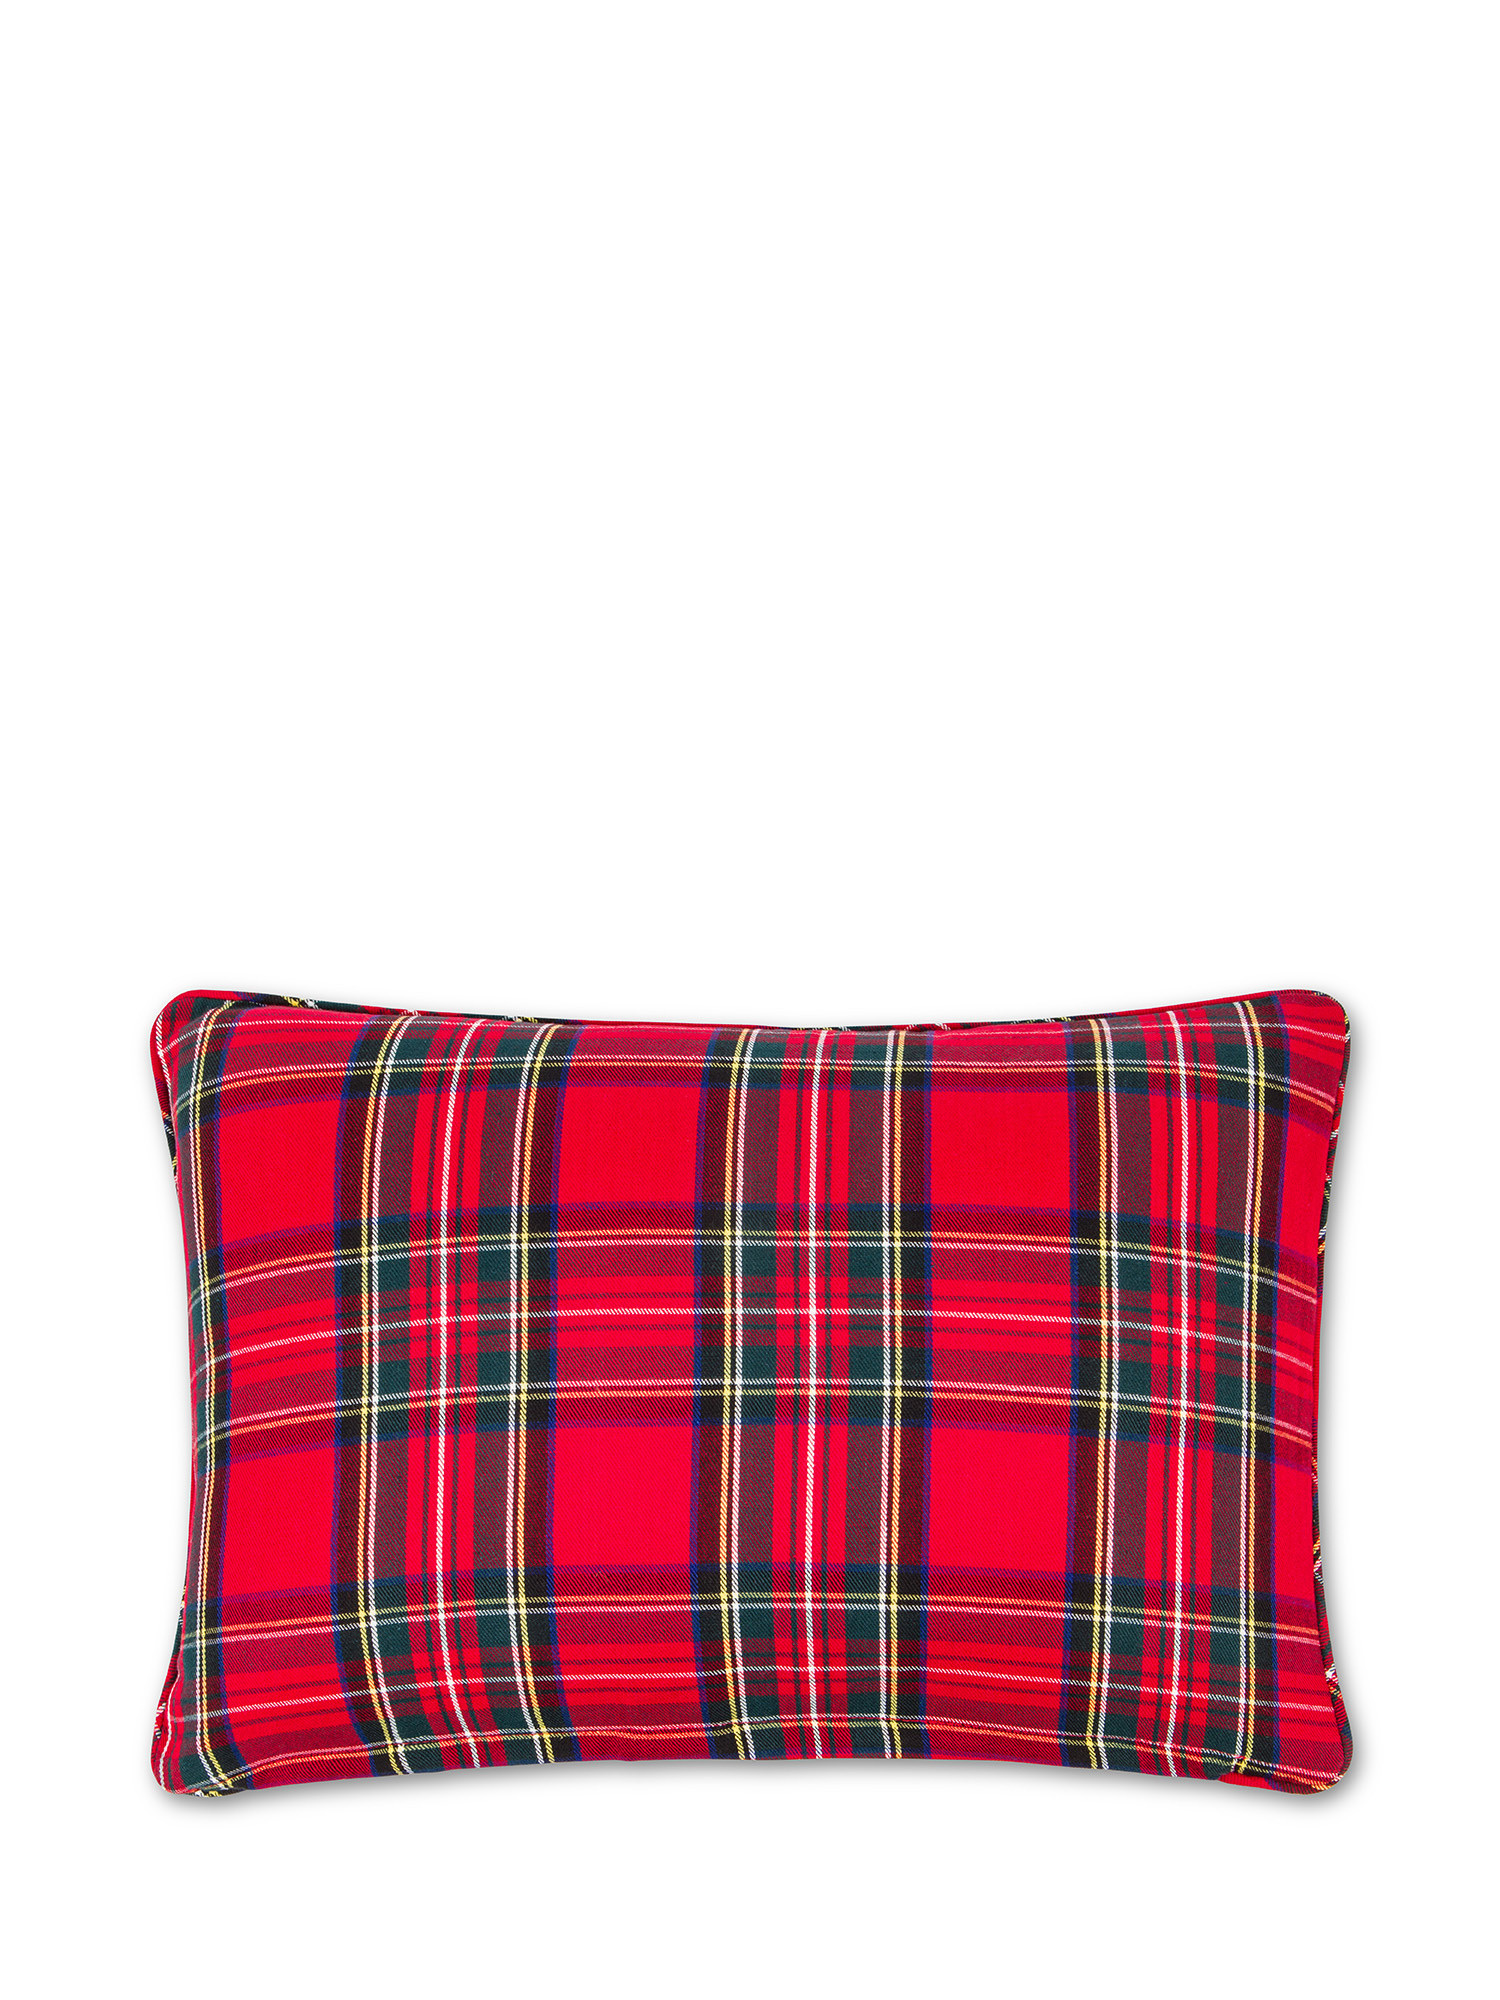 Cuscino cotone tartan 35x50cm, Rosso, large image number 0